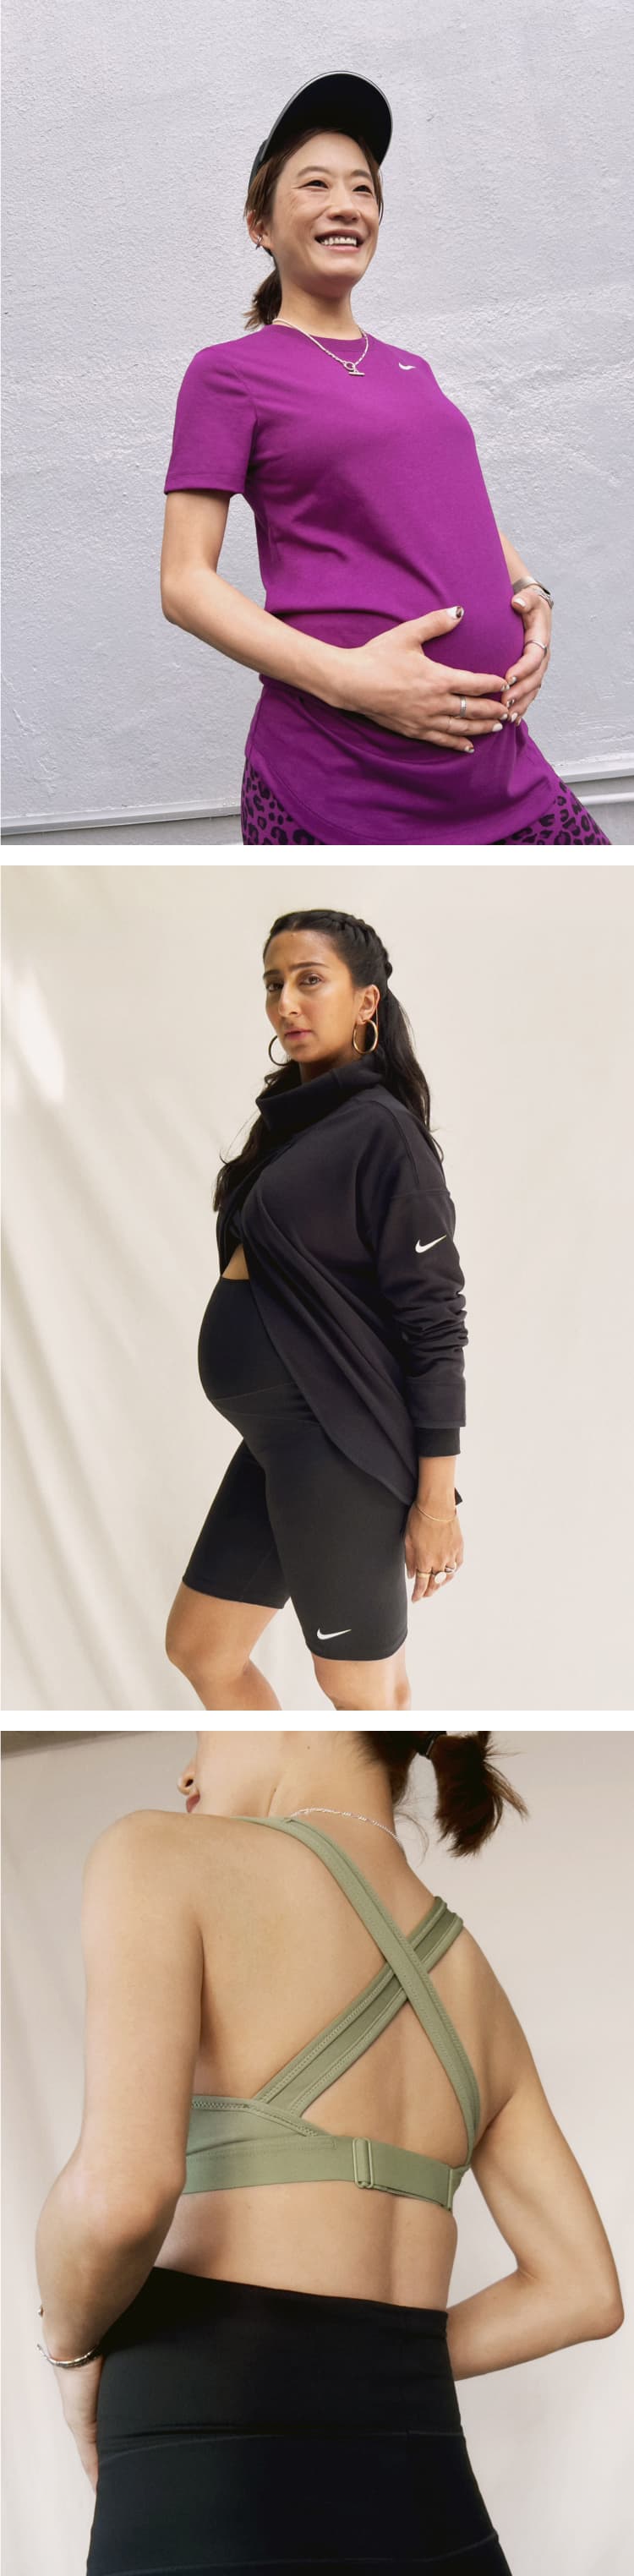 Nike Maternity Collection. Nike CA